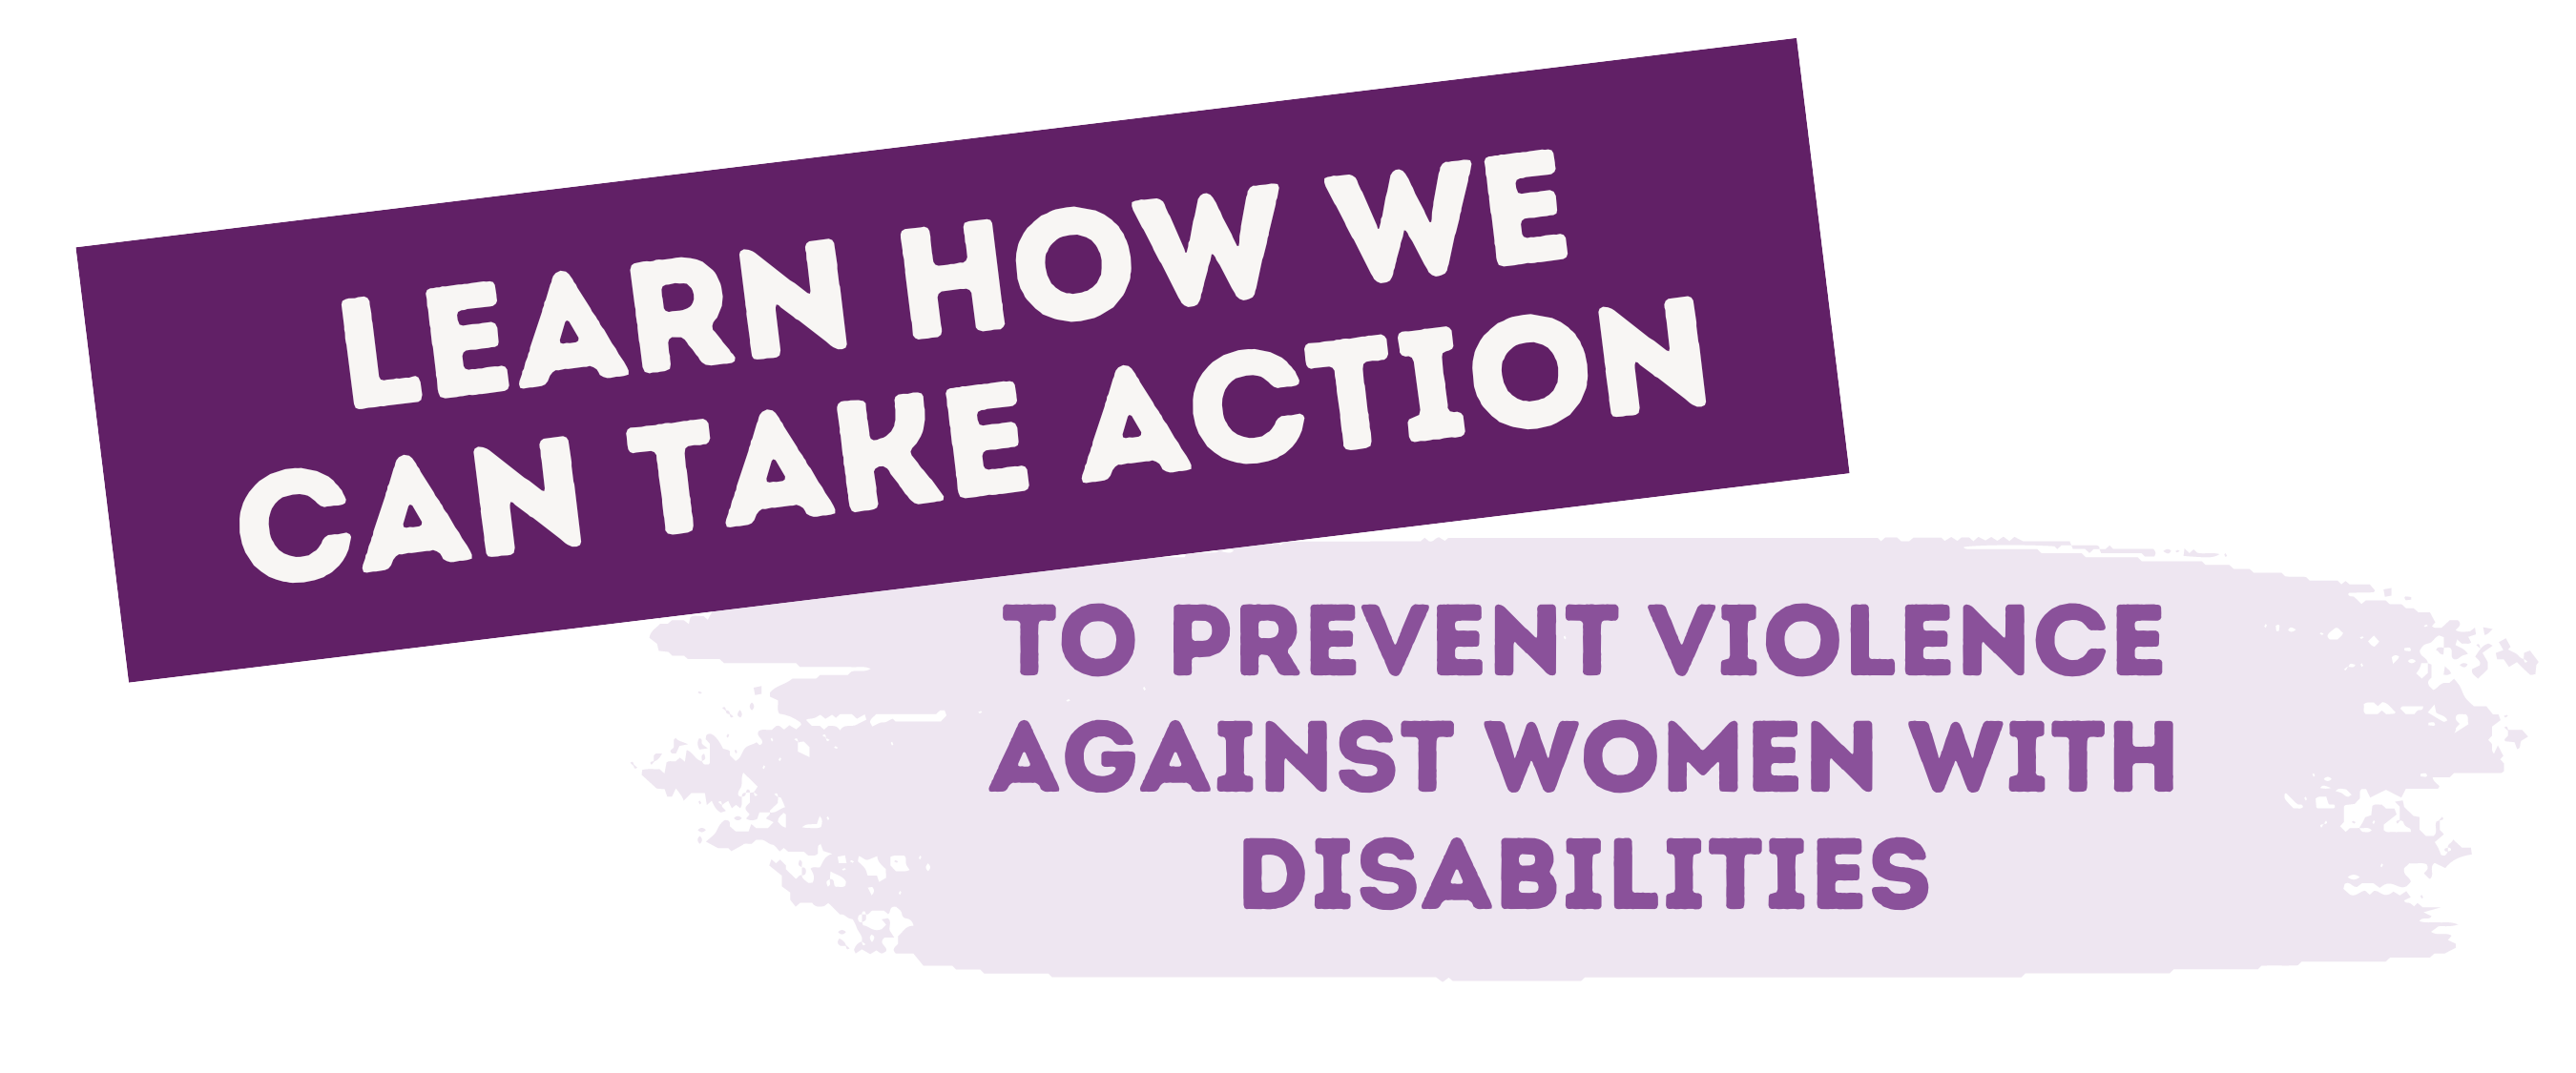 Learn how we can take action to prevent violence against women with disabilities